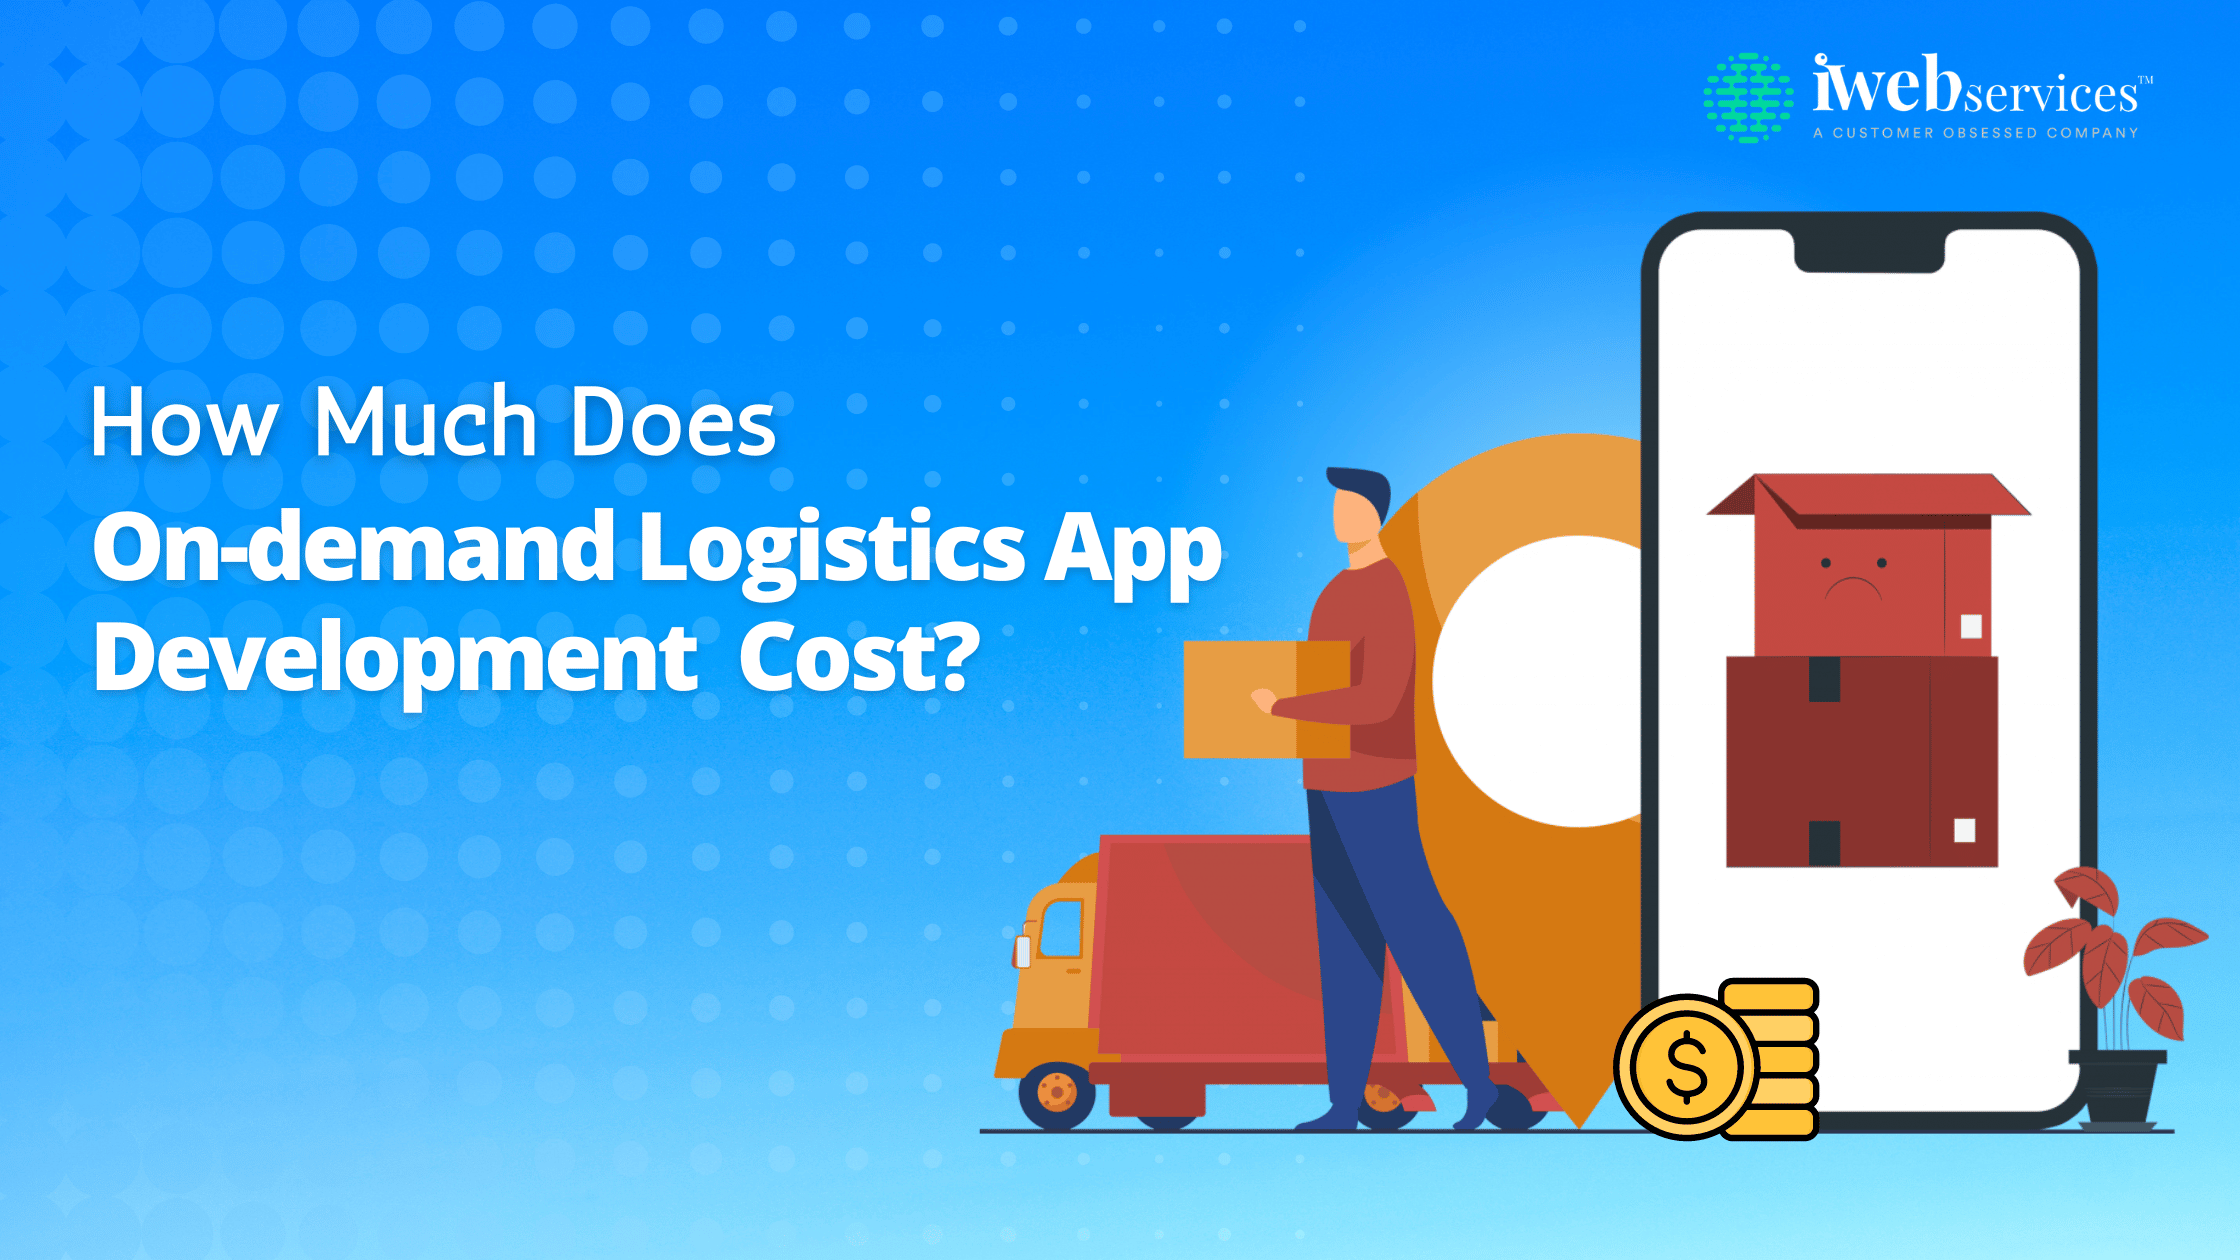 How Much Does On-demand Logistics App Development Cost?